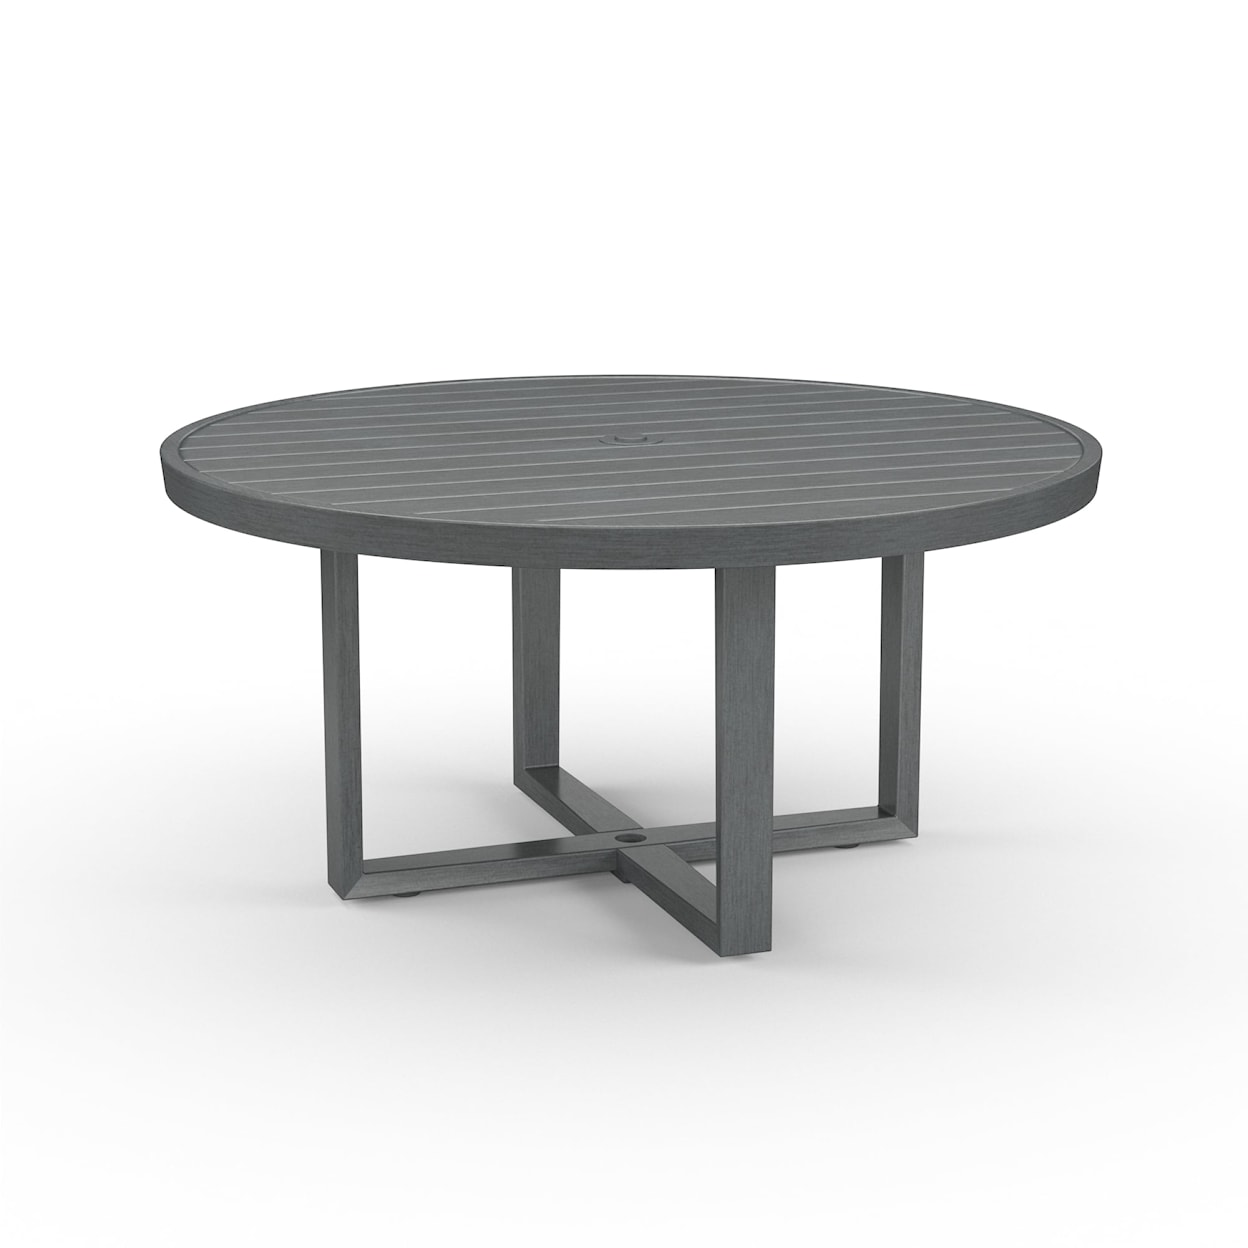 Sunset West Redondo Outdoor 60" Round Dining Table